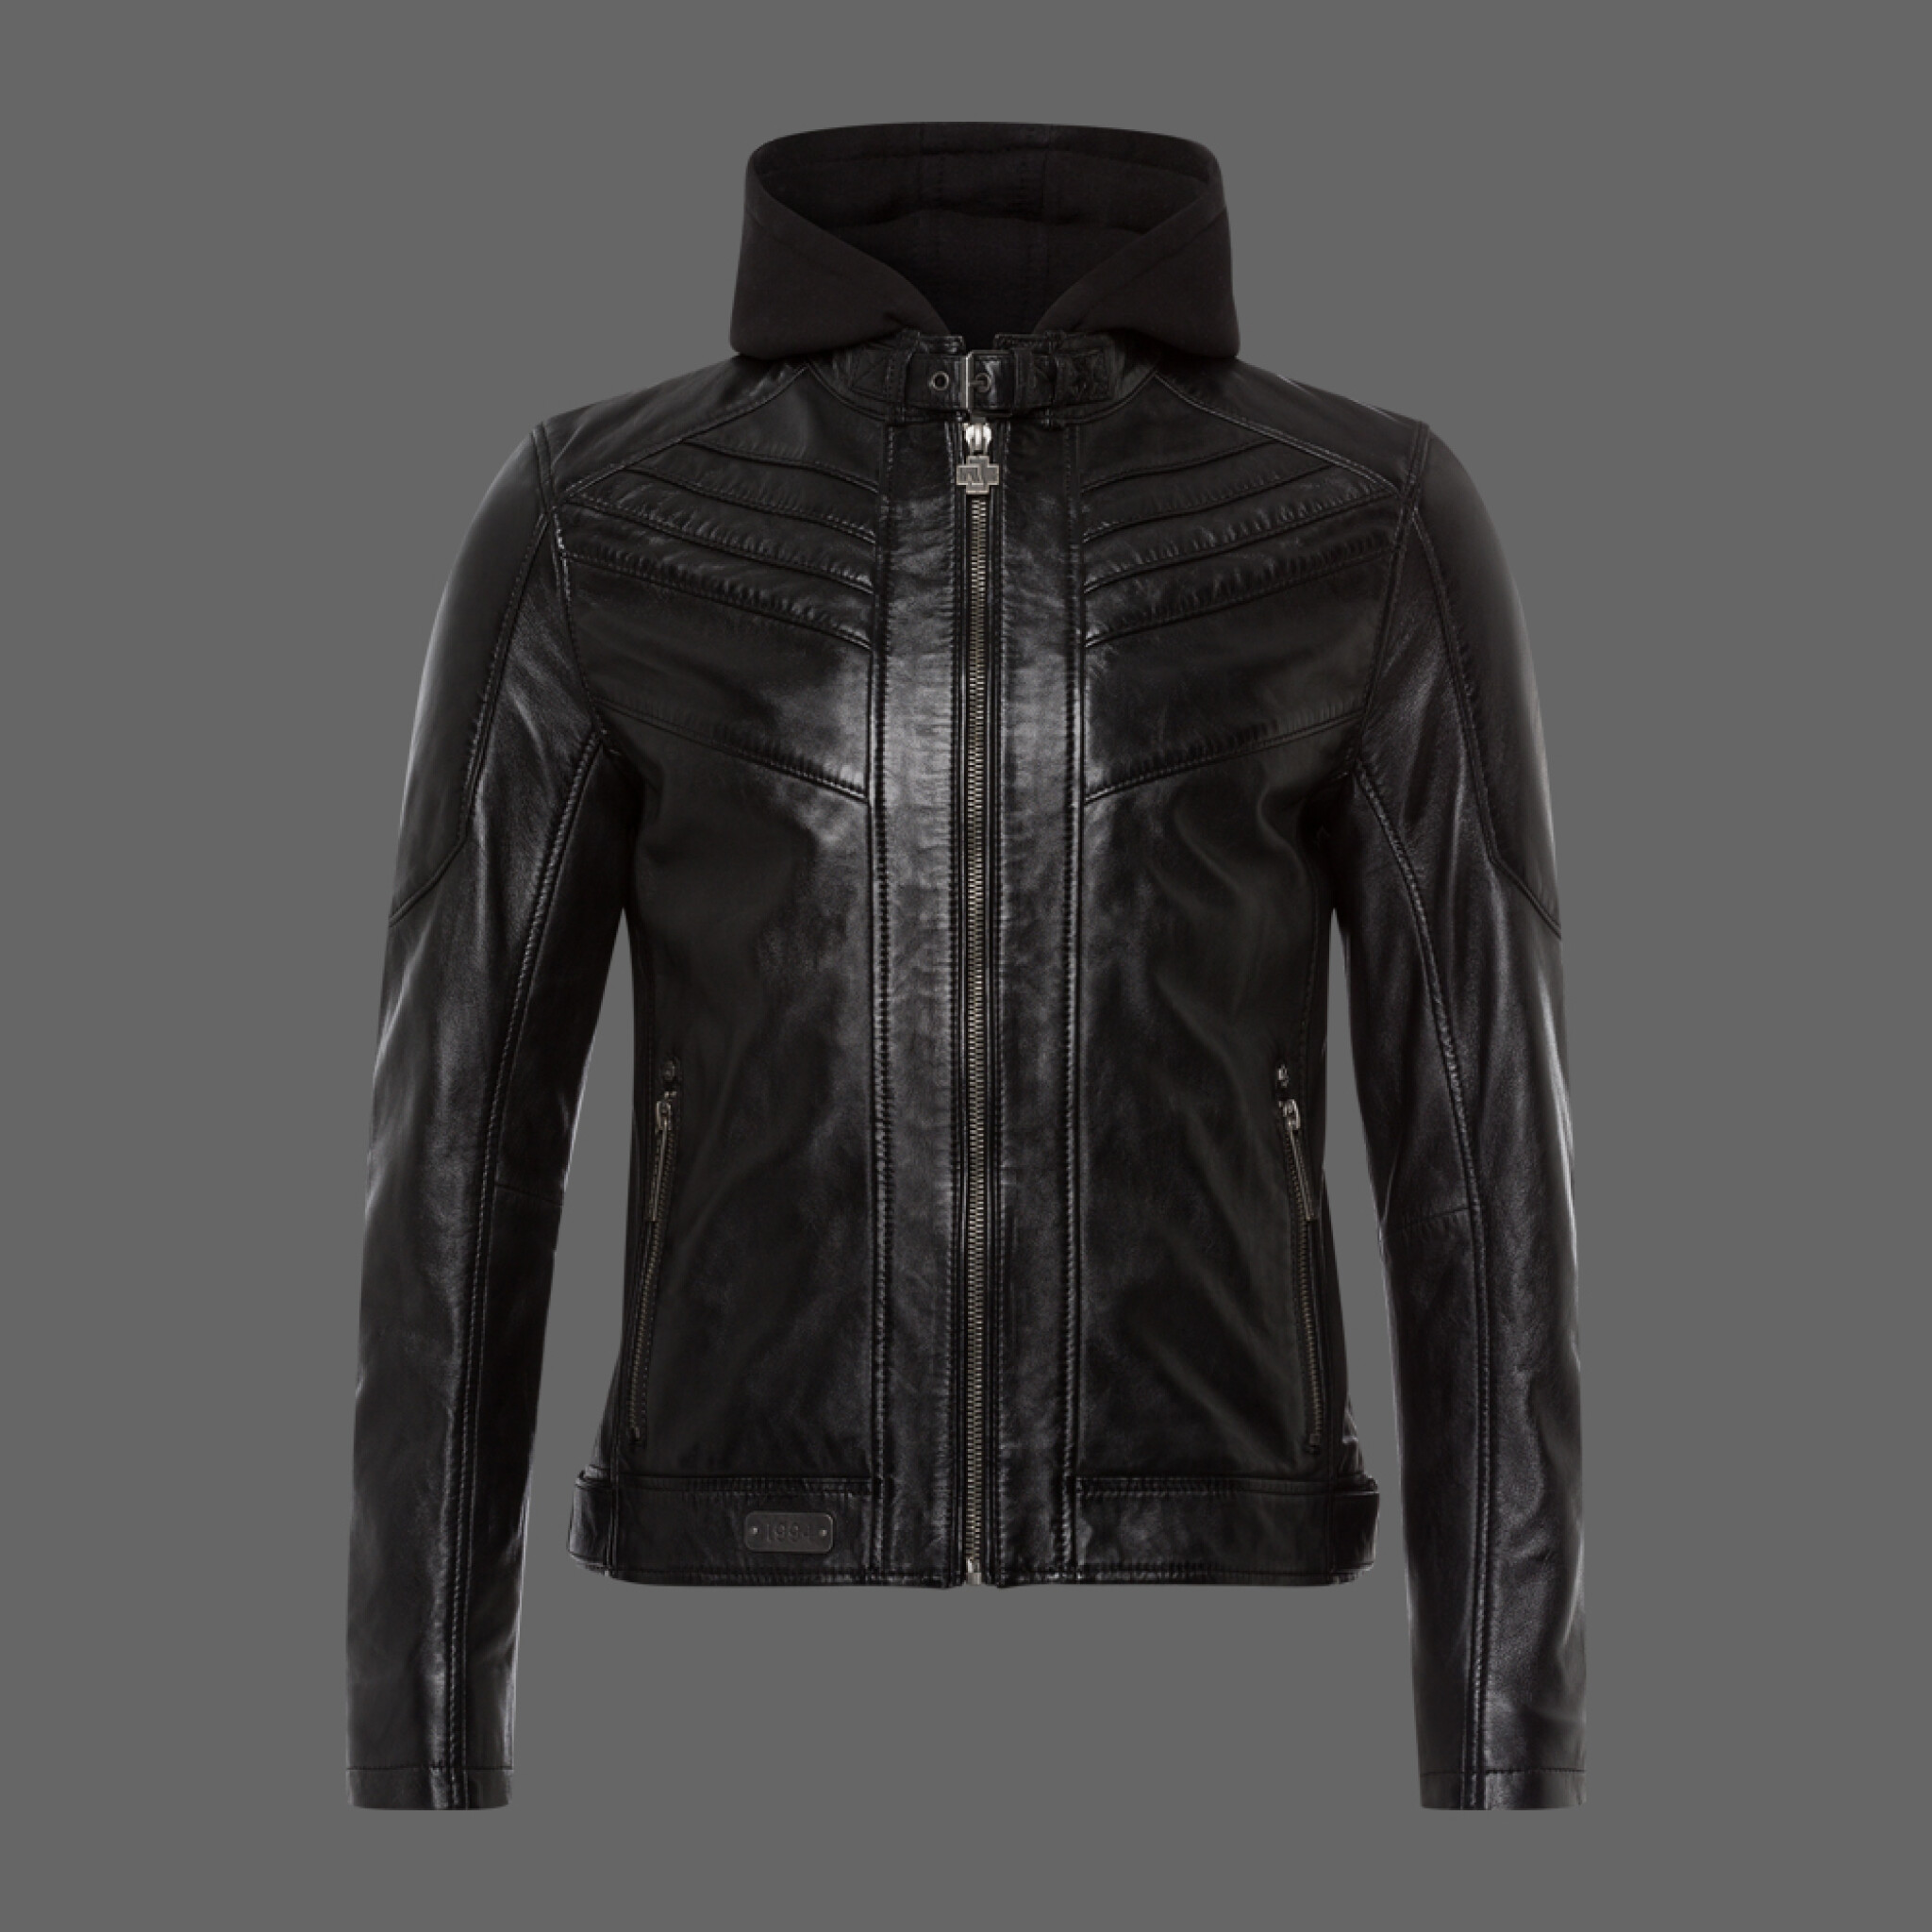 Details more than 147 leather jacket with grey hood